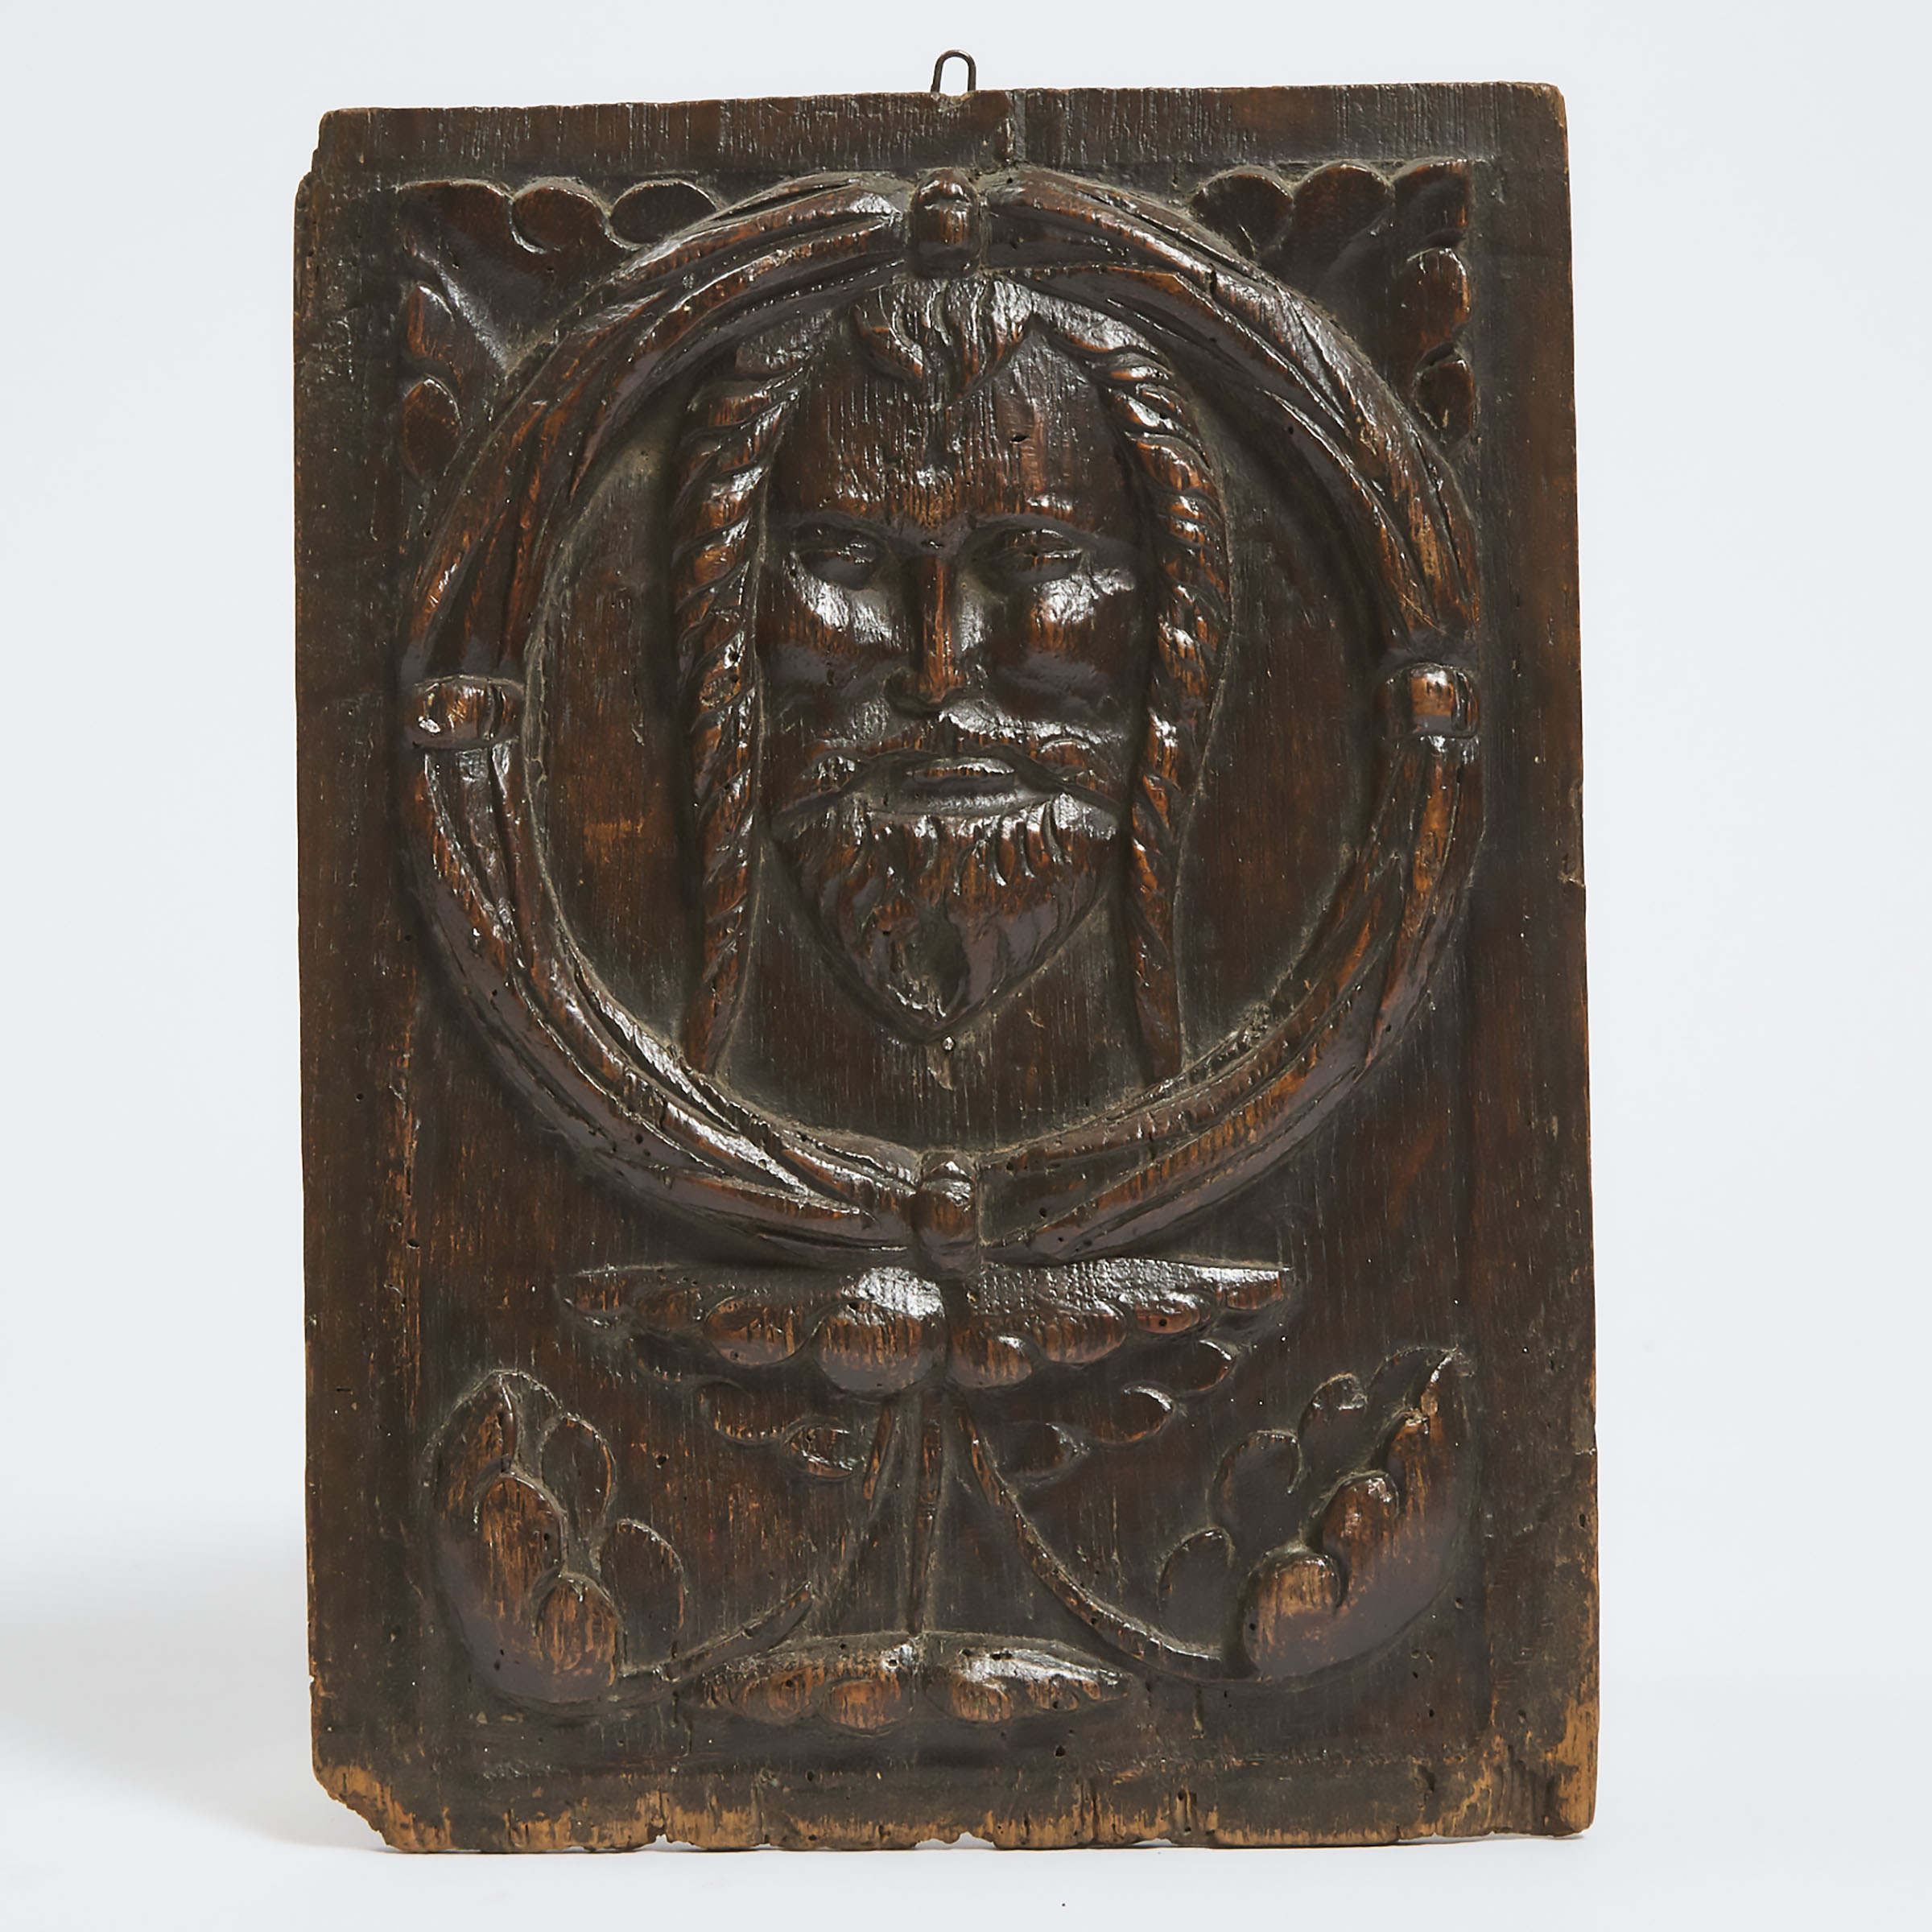 Relief Carved Oak Panel With a Mask of Jesus Within a Wreath, 16th century